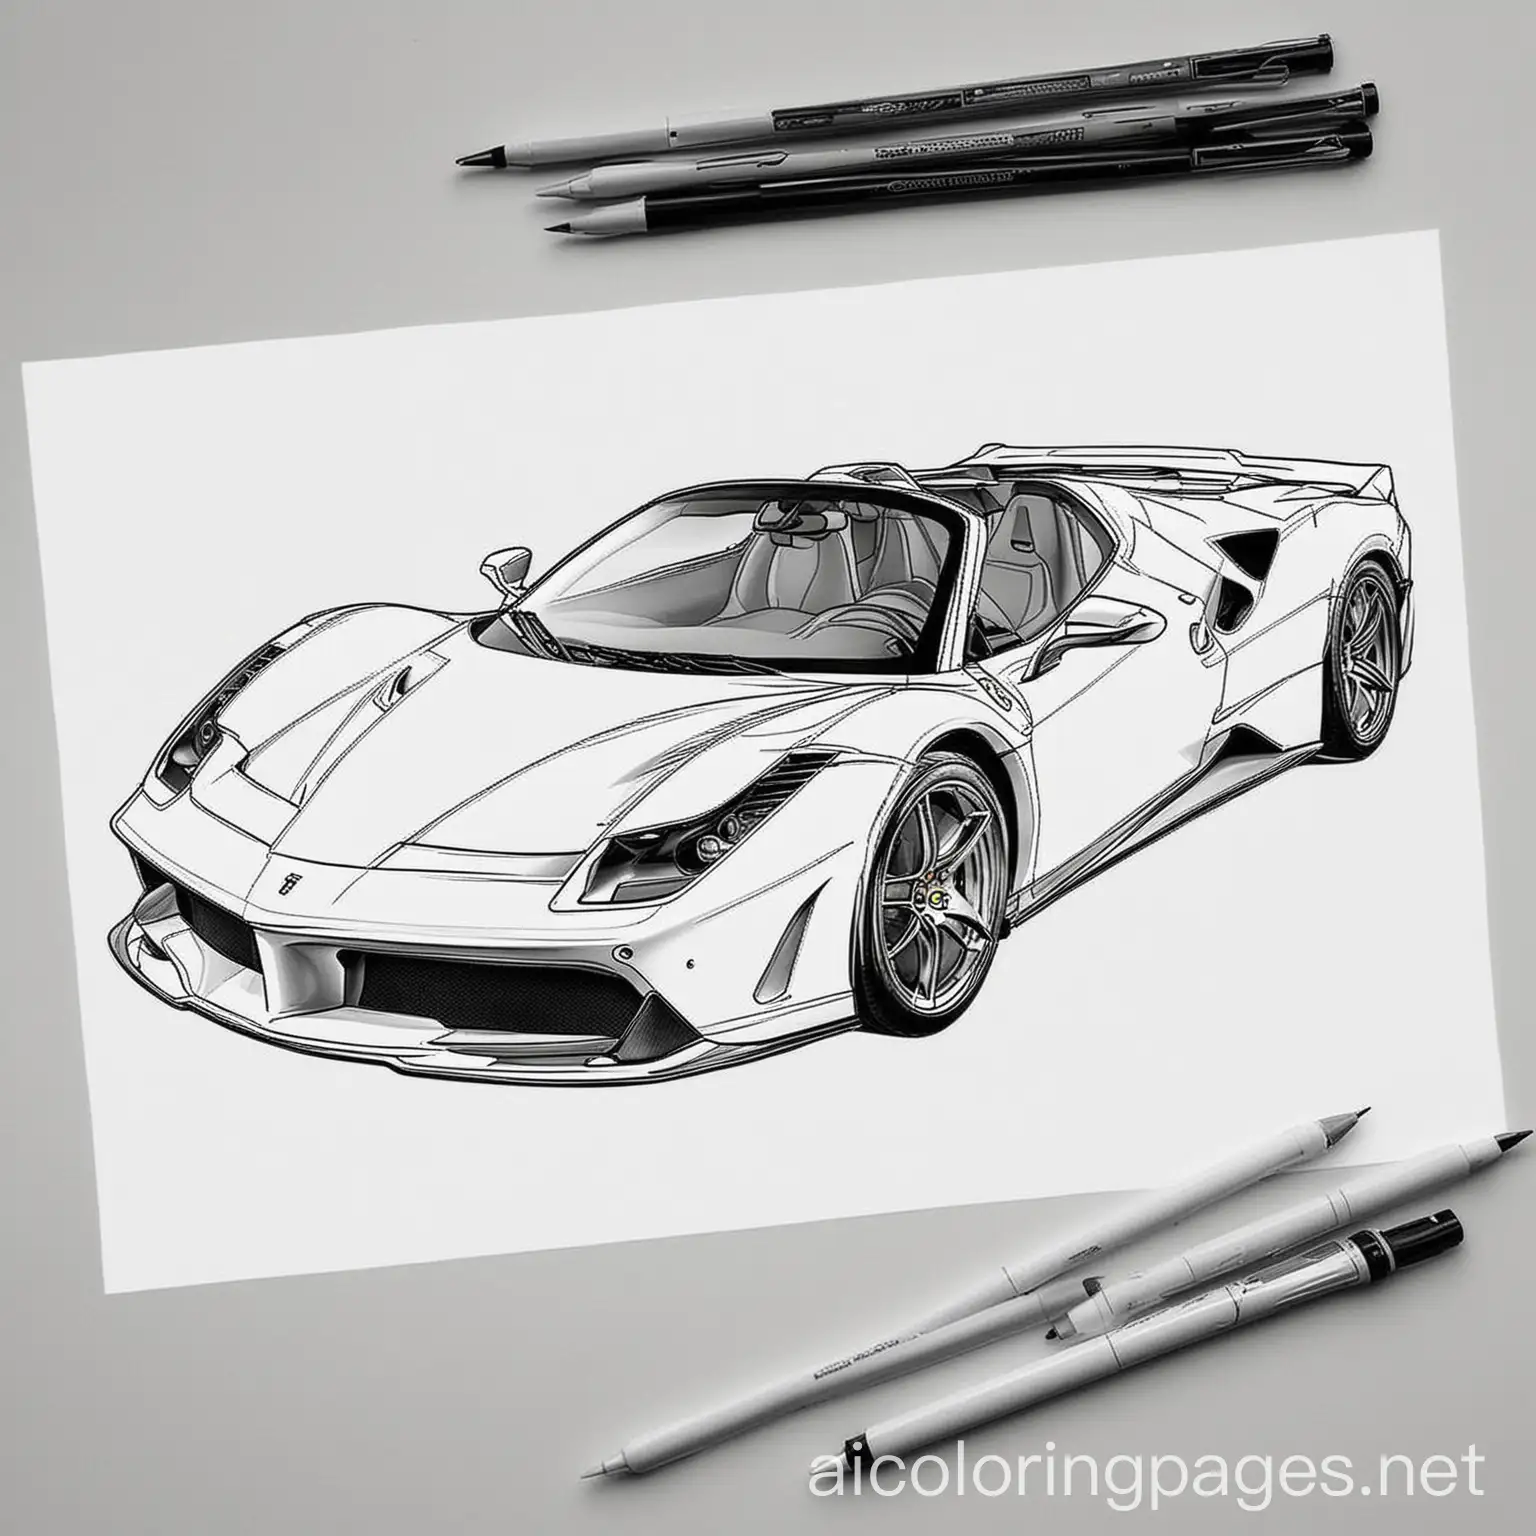 Ferrari car coloring page
, Coloring Page, black and white, line art, white background, Simplicity, Ample White Space. The background of the coloring page is plain white to make it easy for young children to color within the lines. The outlines of all the subjects are easy to distinguish, making it simple for kids to color without too much difficulty